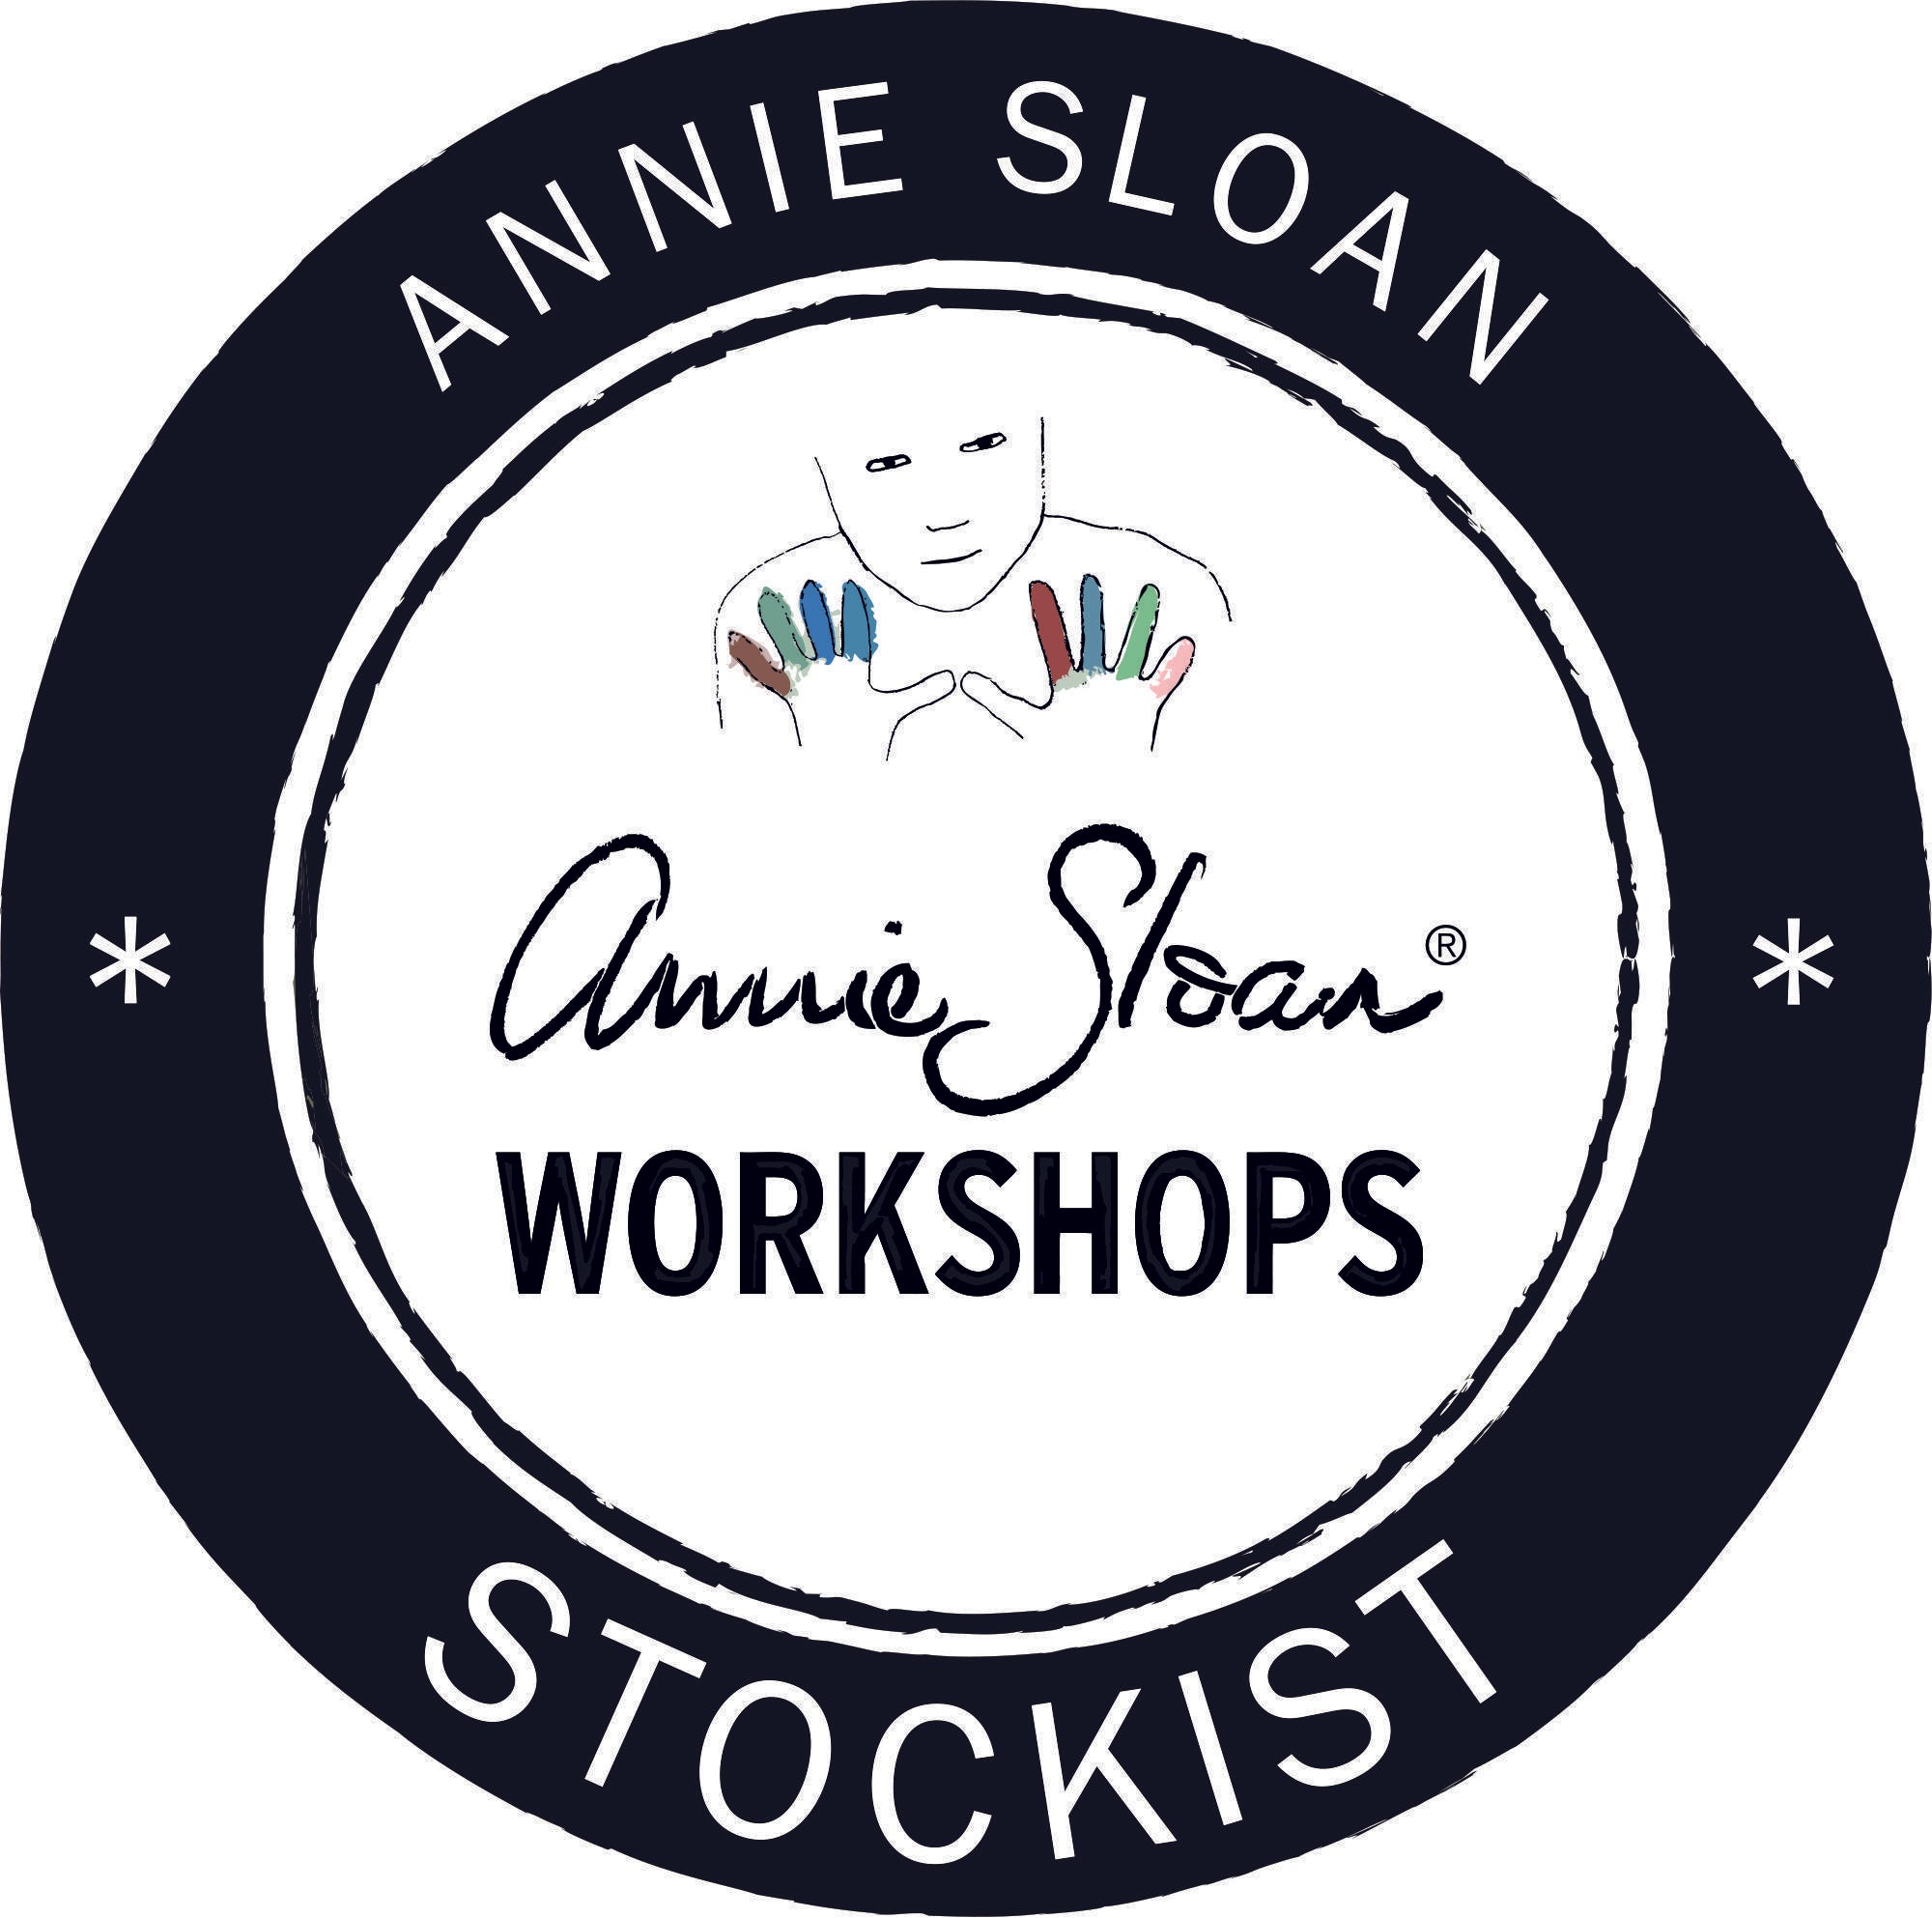 Paint Your Own Furniture Workshop December 16th 6pm-8:00pm Annie Sloan